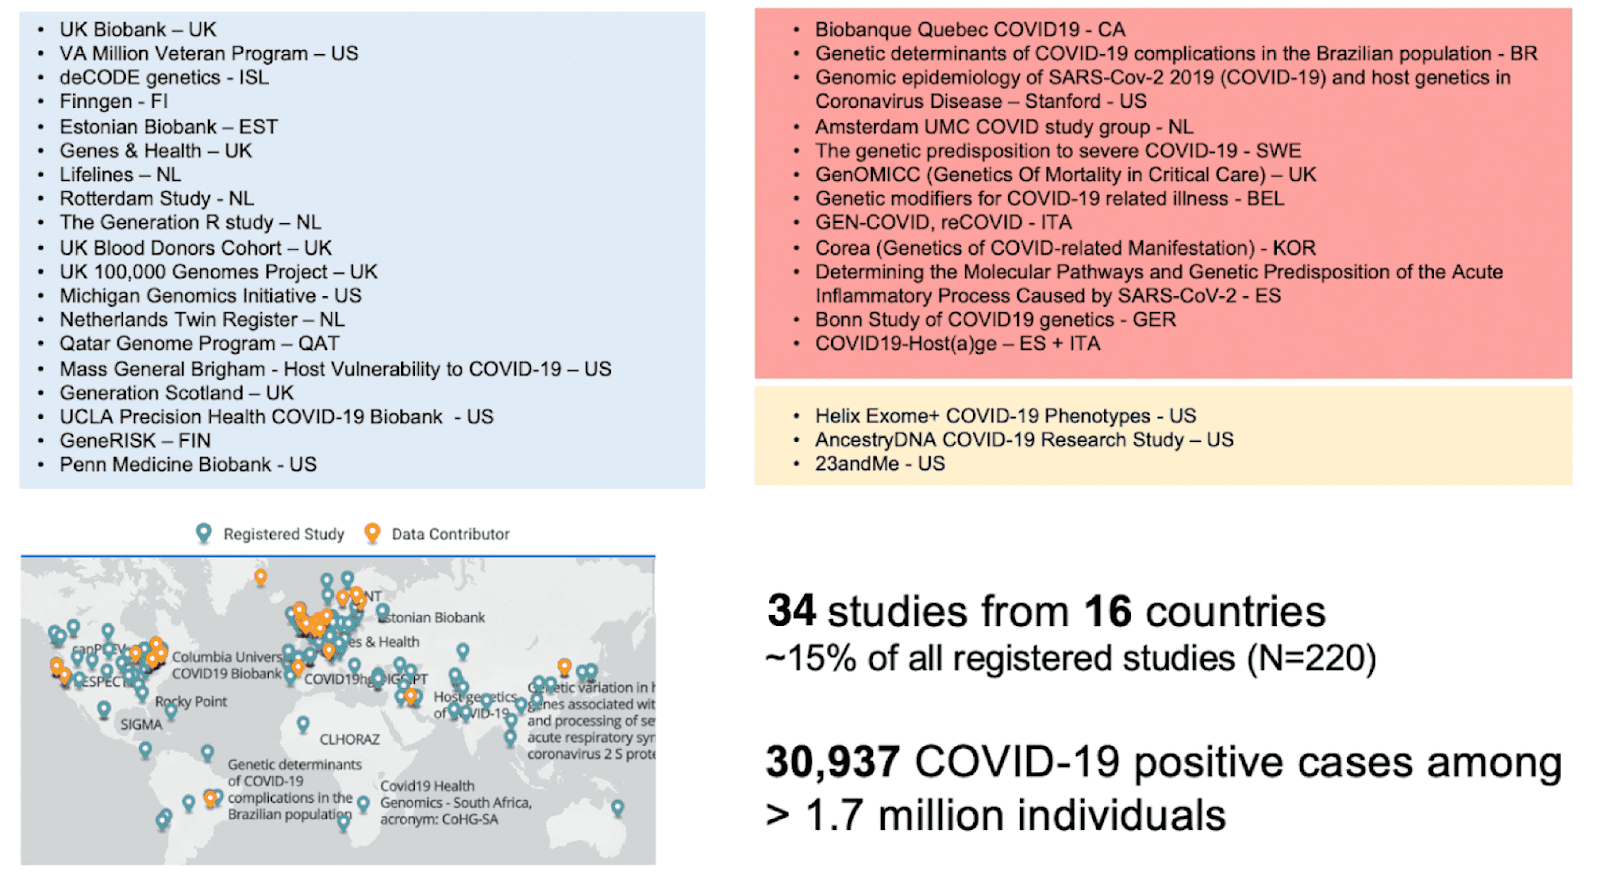 List of partners and a map of contributing studies 